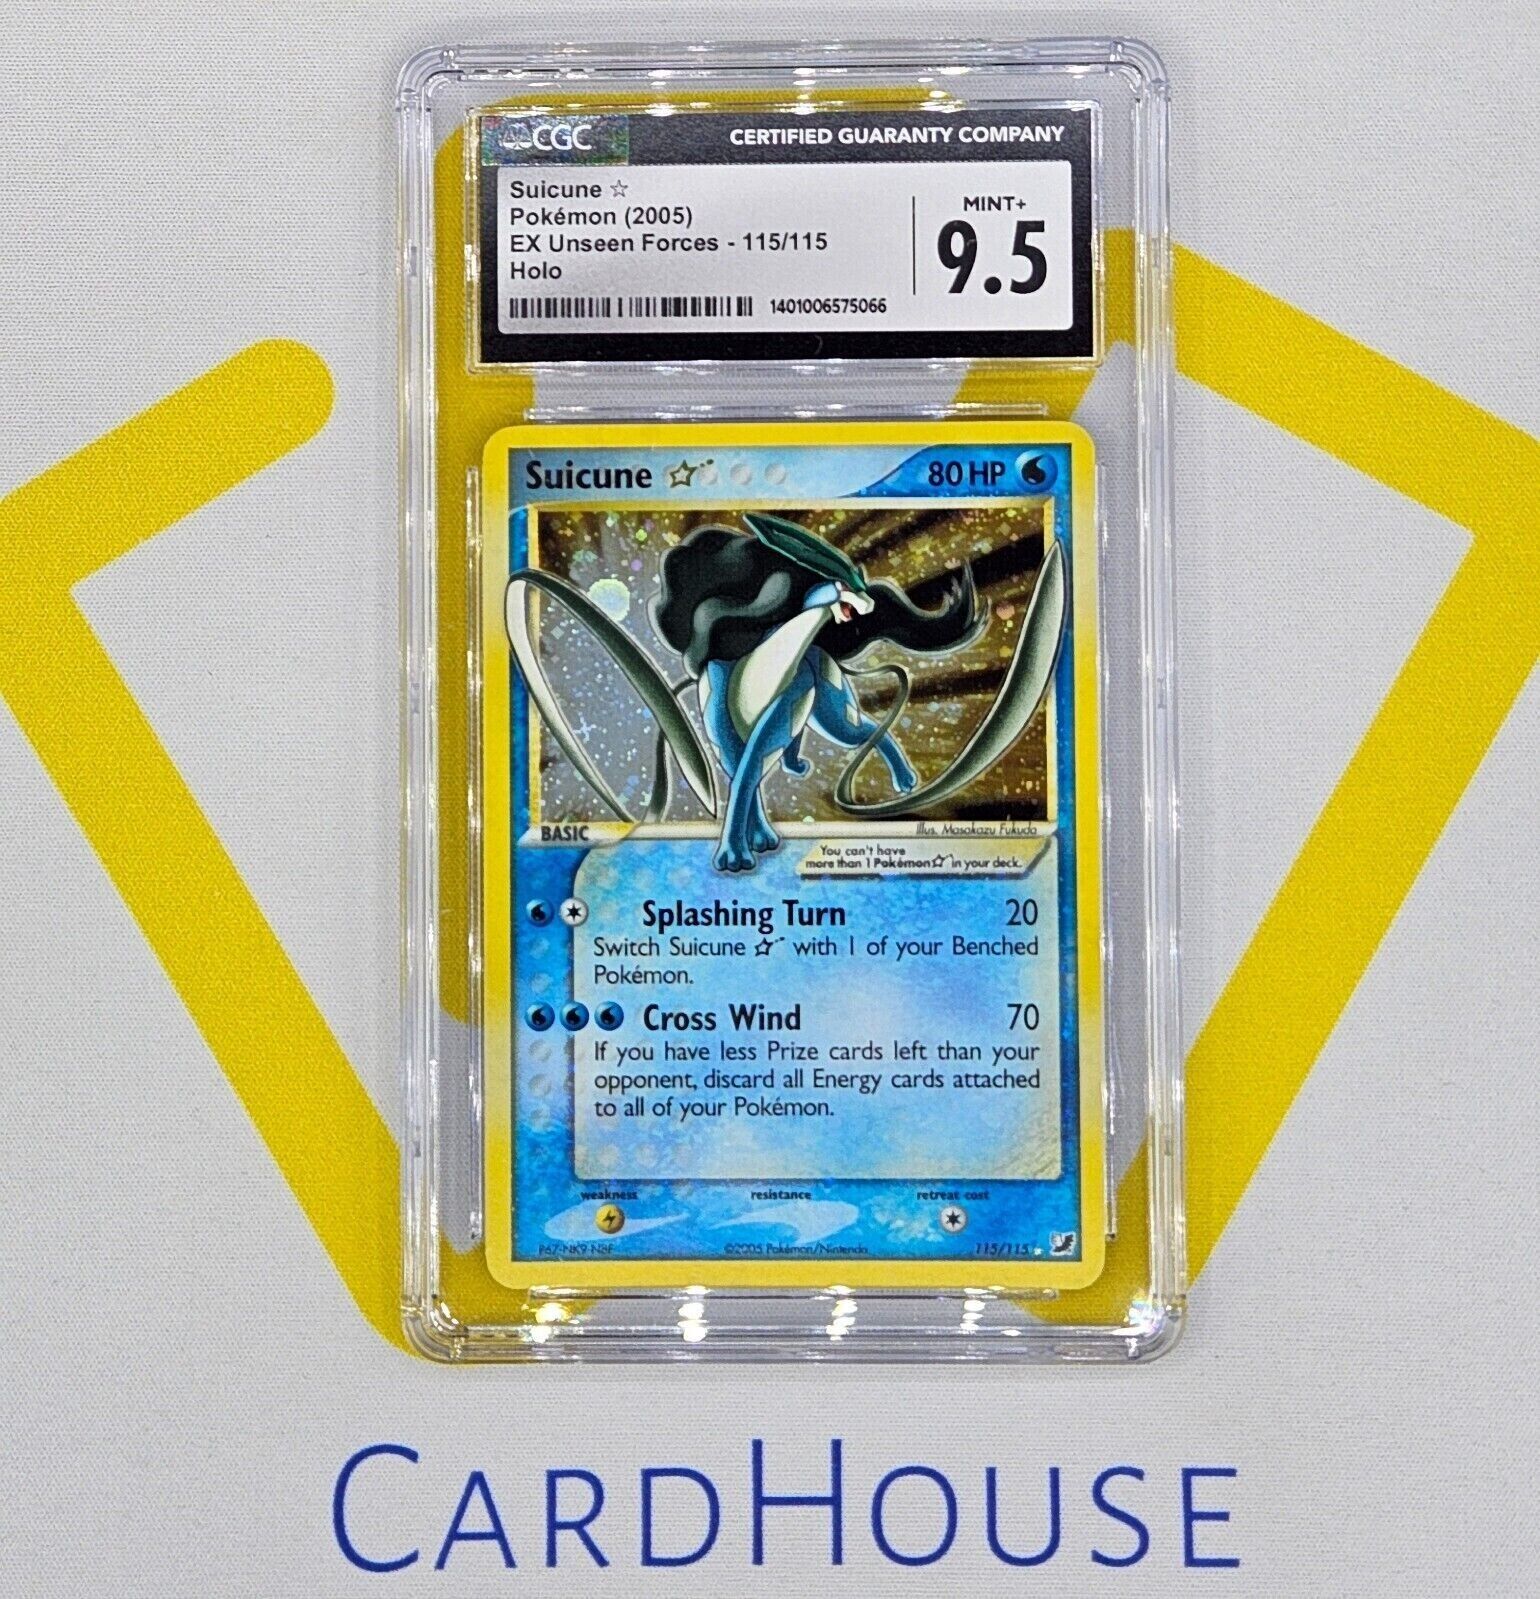 CGC 95 MINT Suicune Gold Star EX Unseen Forces Pokemon PSA